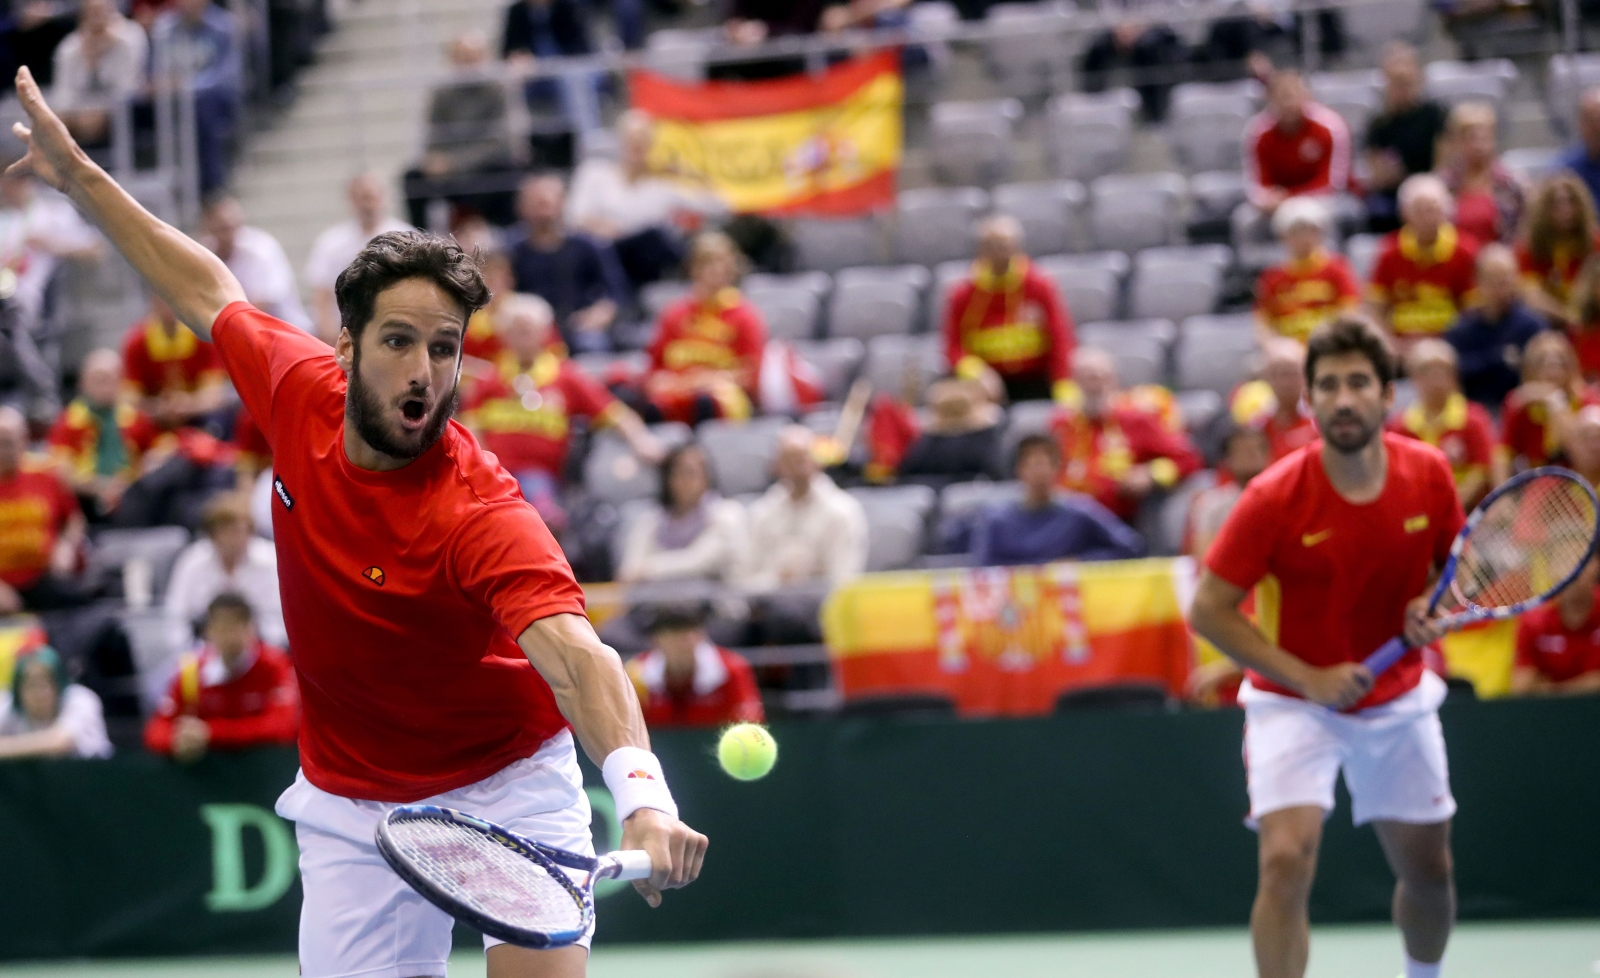 Spain's tennis players frustrated when Rafael Nadal misses Davis Cup, warns RFET chief - International Business Times UK